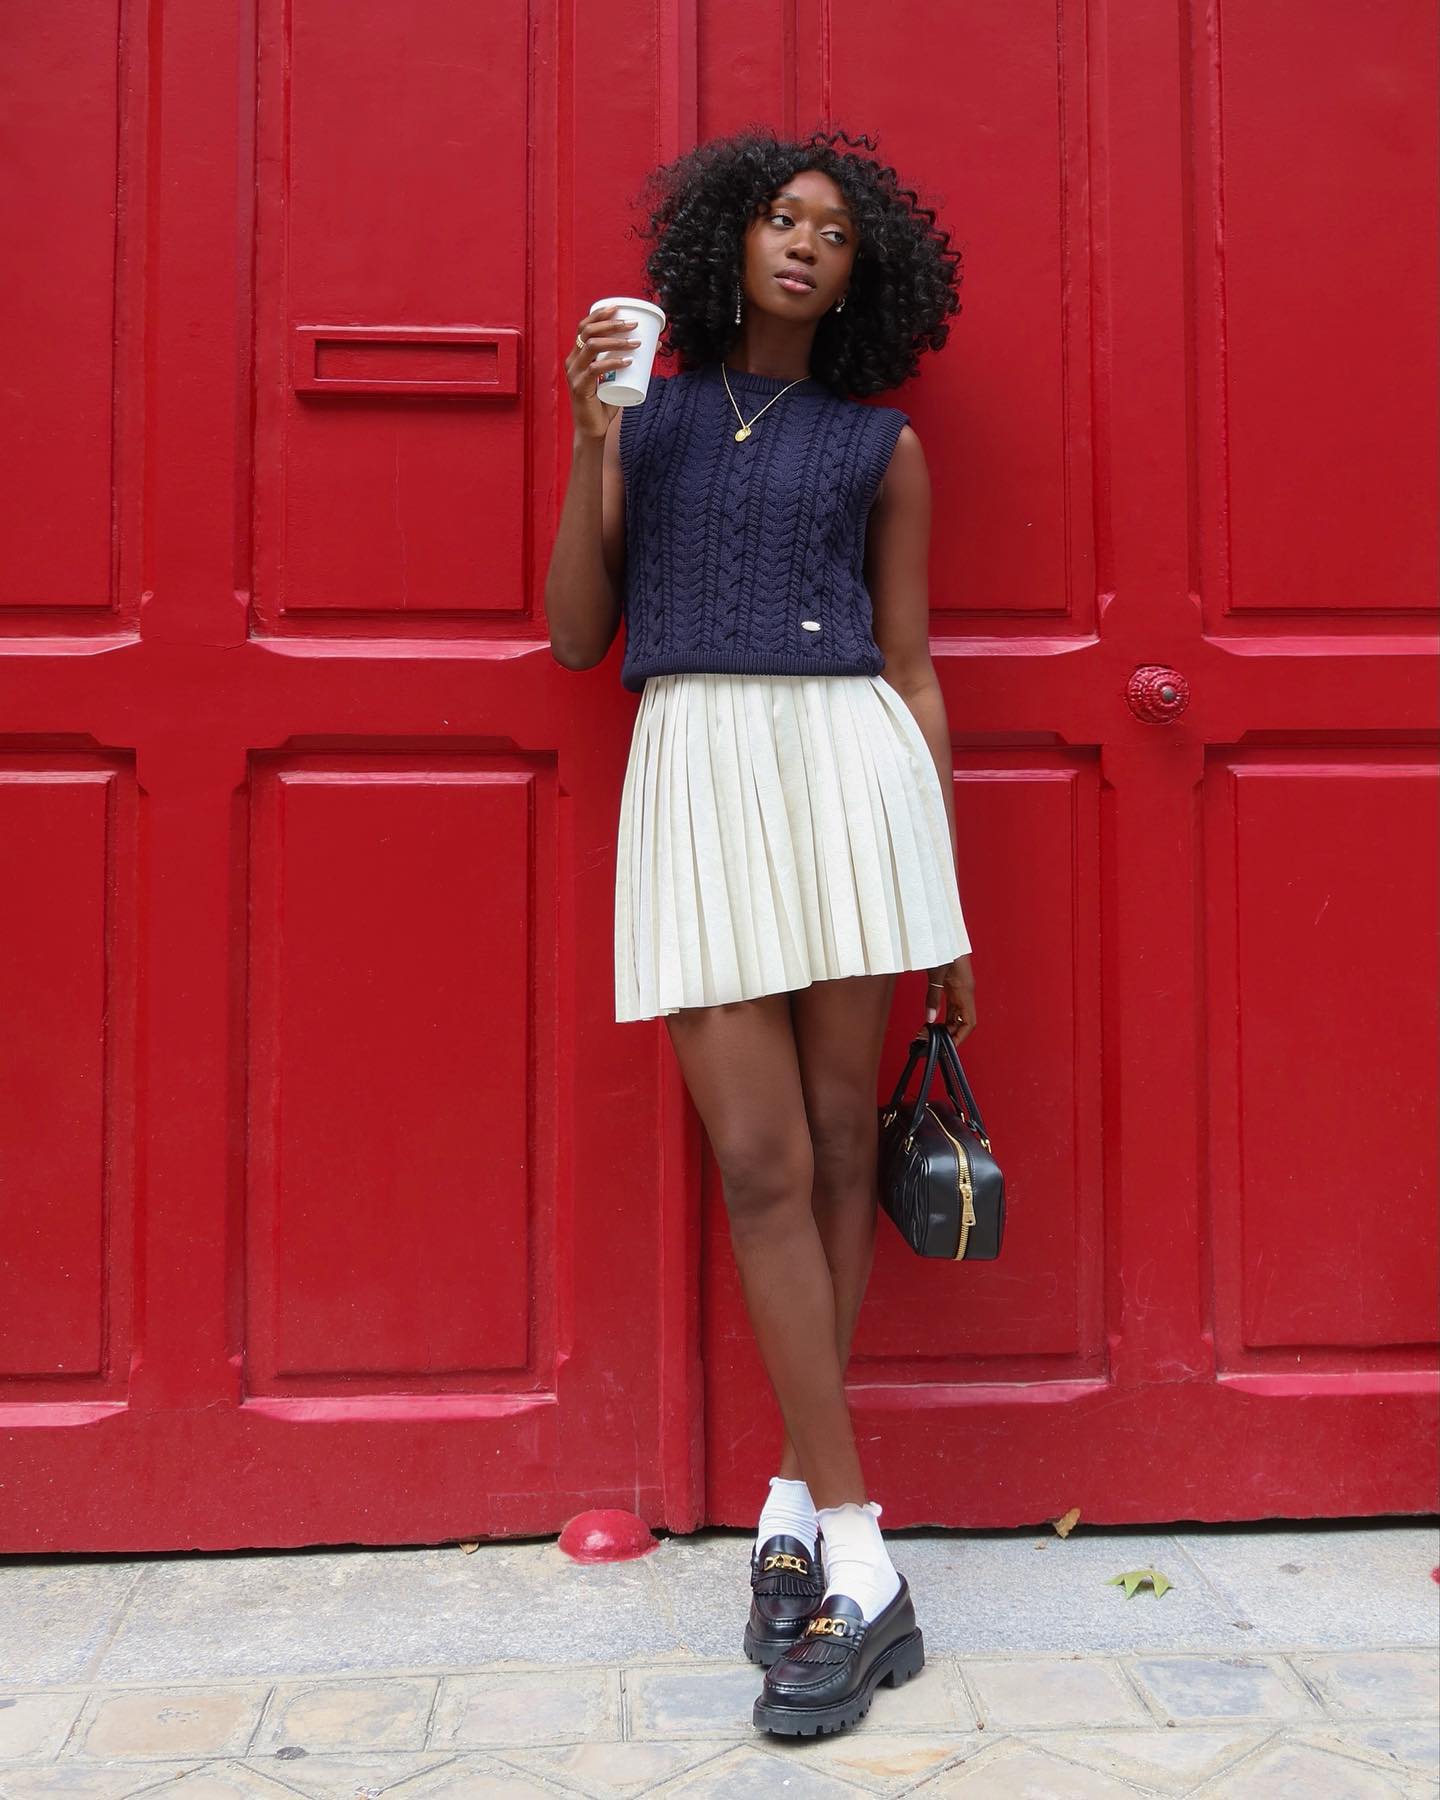 French style influencer posing with a cup of coffee in front of red doors in Paris wearing a sleeveless navy sweater vest, pleated white skirt, ruffle socks, and black chunky loafers